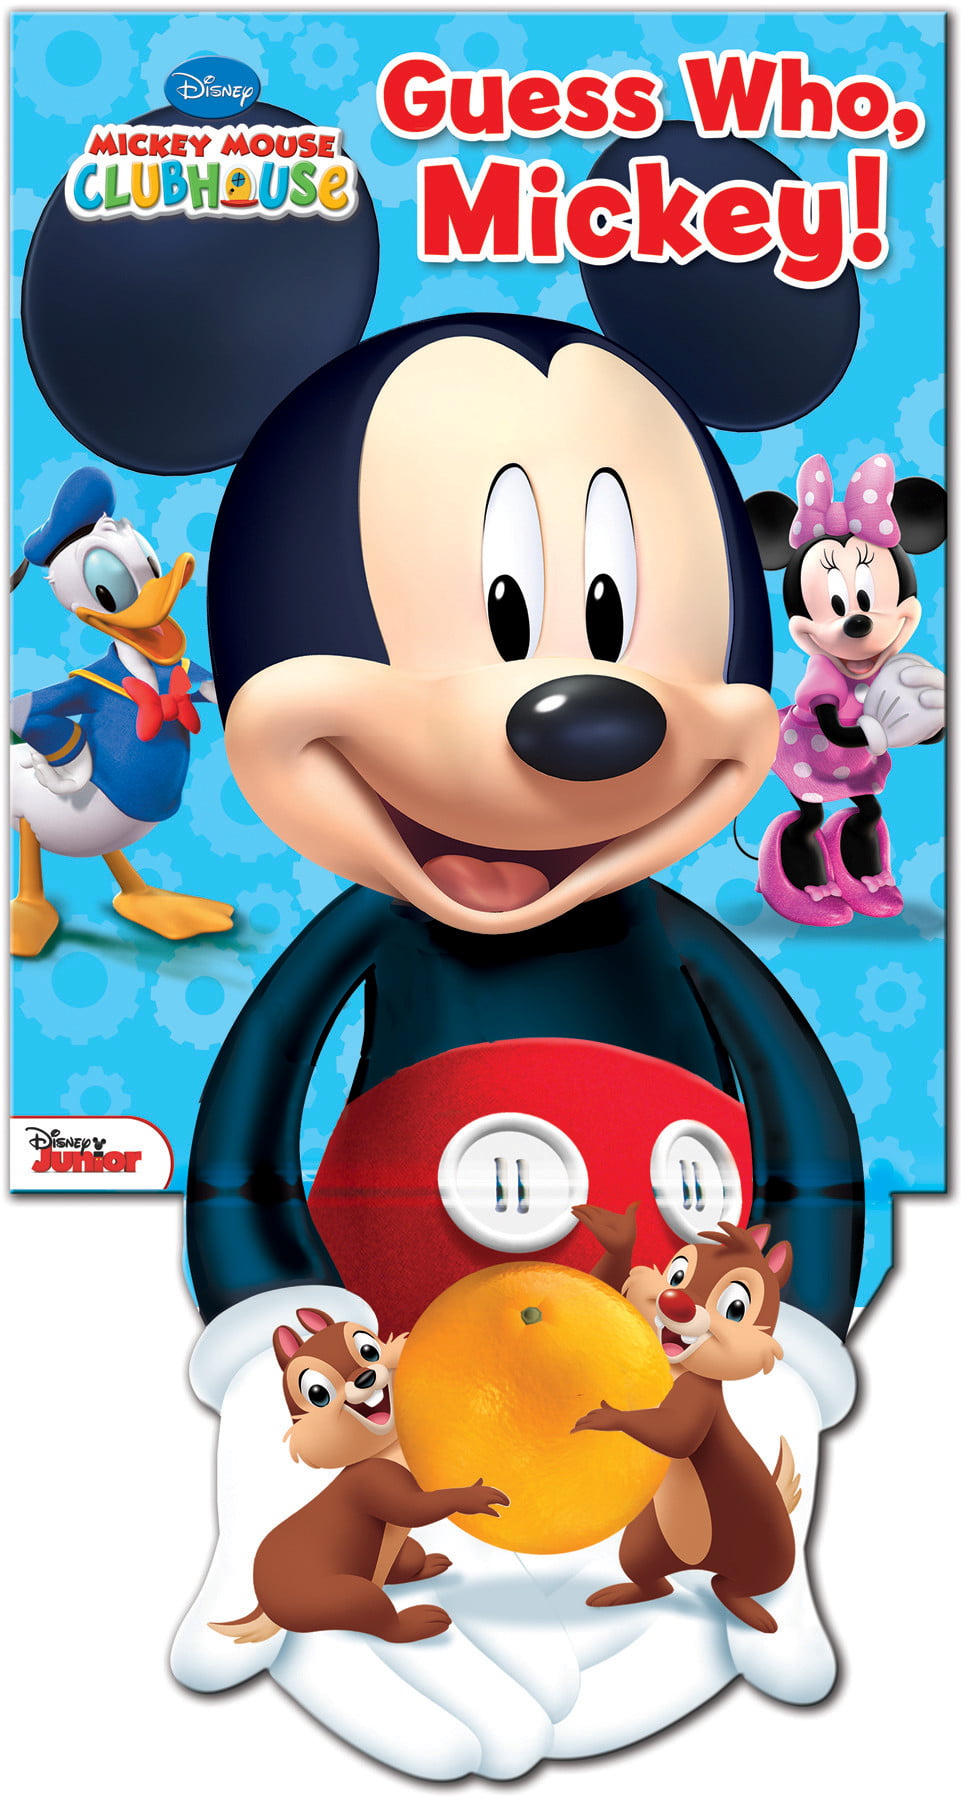 Disney Mickey Mouse Clubhouse Guess Who, Mickey! (Part of